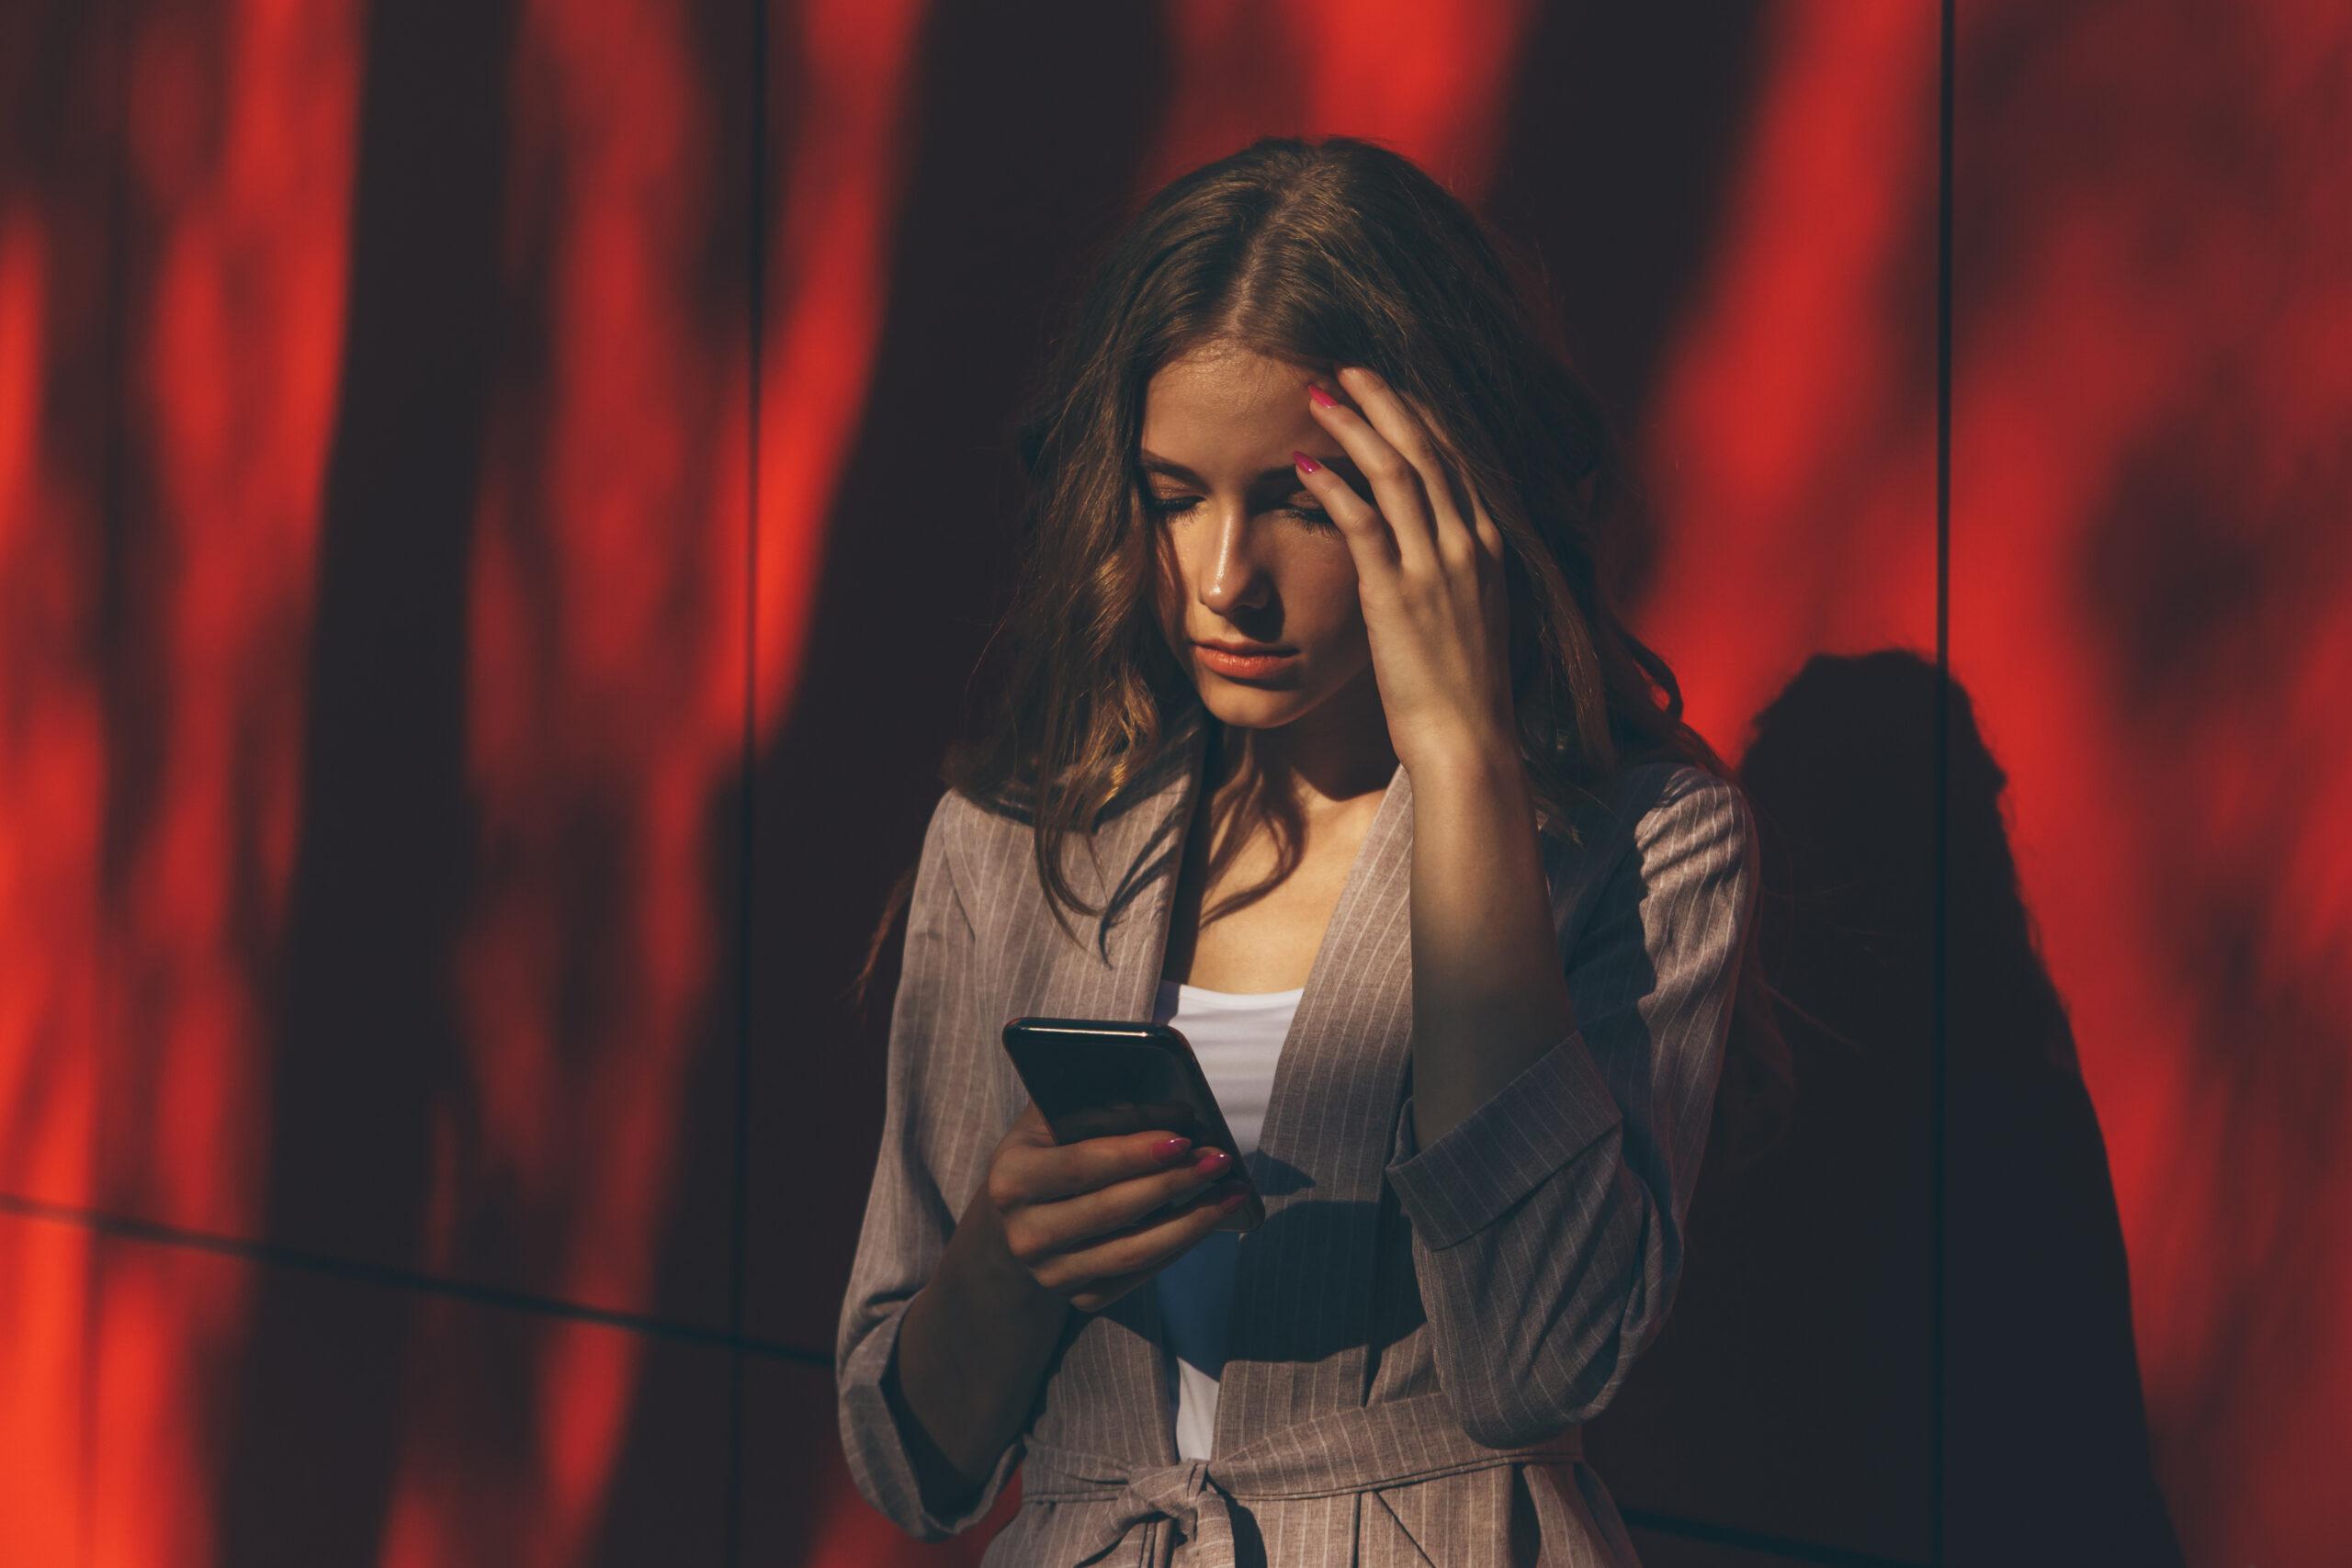 Unhappy young woman using smartphone portrait. Sad girl reading bad news or texting with mobile phone